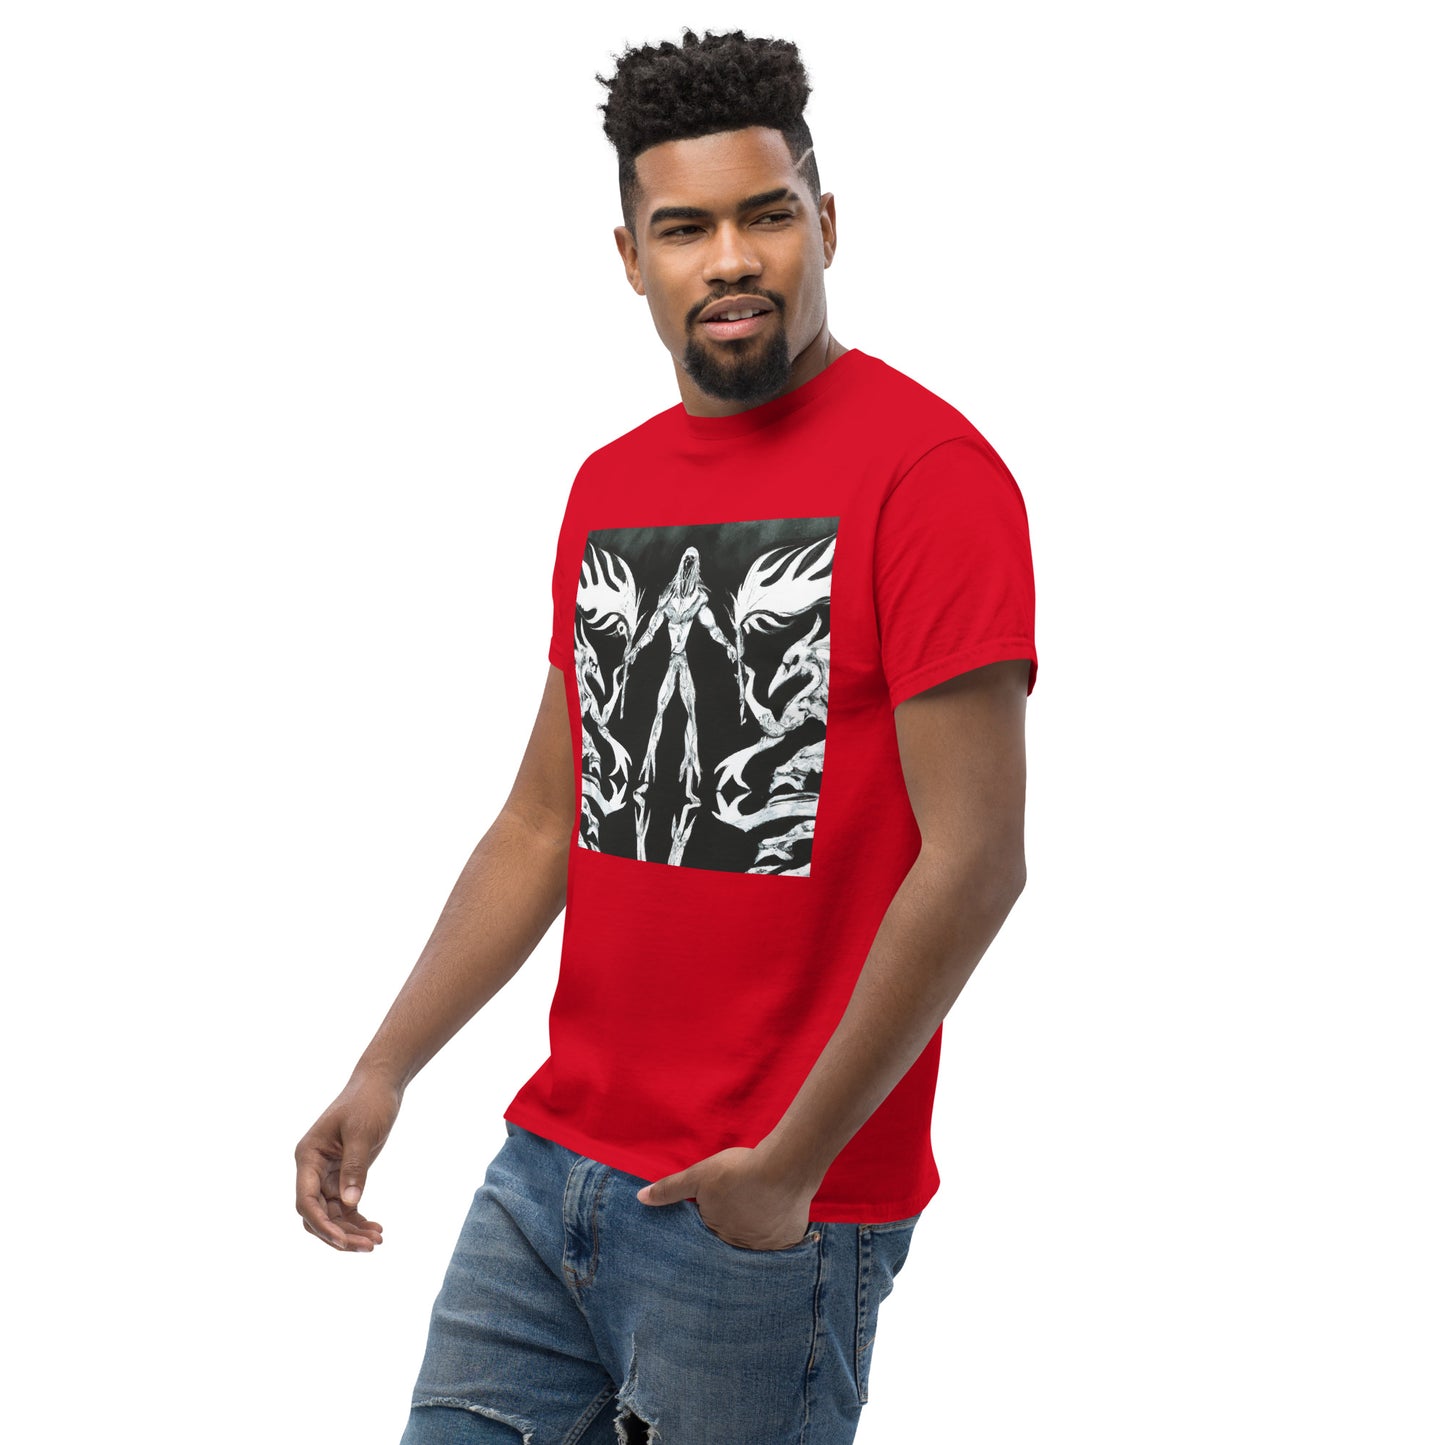 Hellz Palace® Brand Against Men's tee